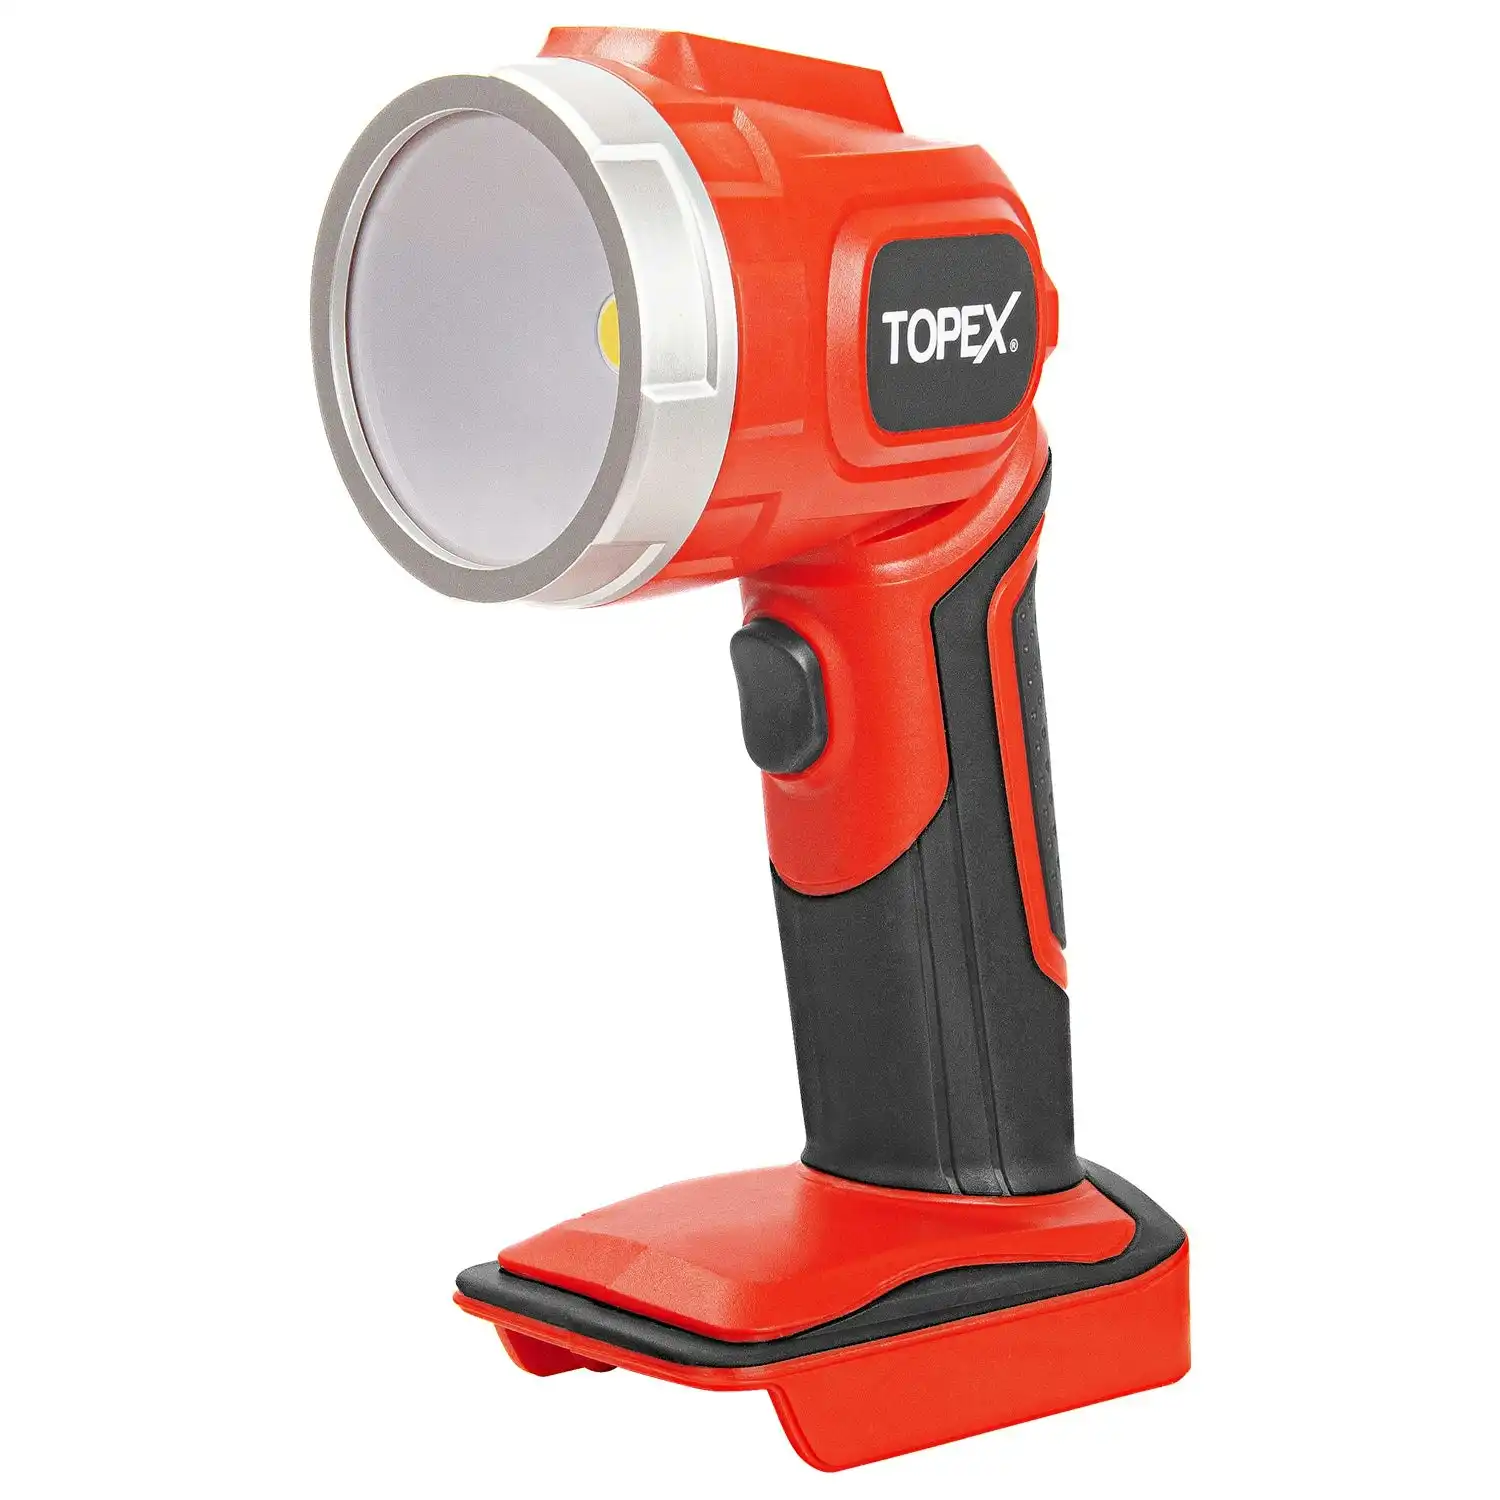 Topex 20V LED Light 300 Lumen Lightweight LED Torch Skin Only without Battery